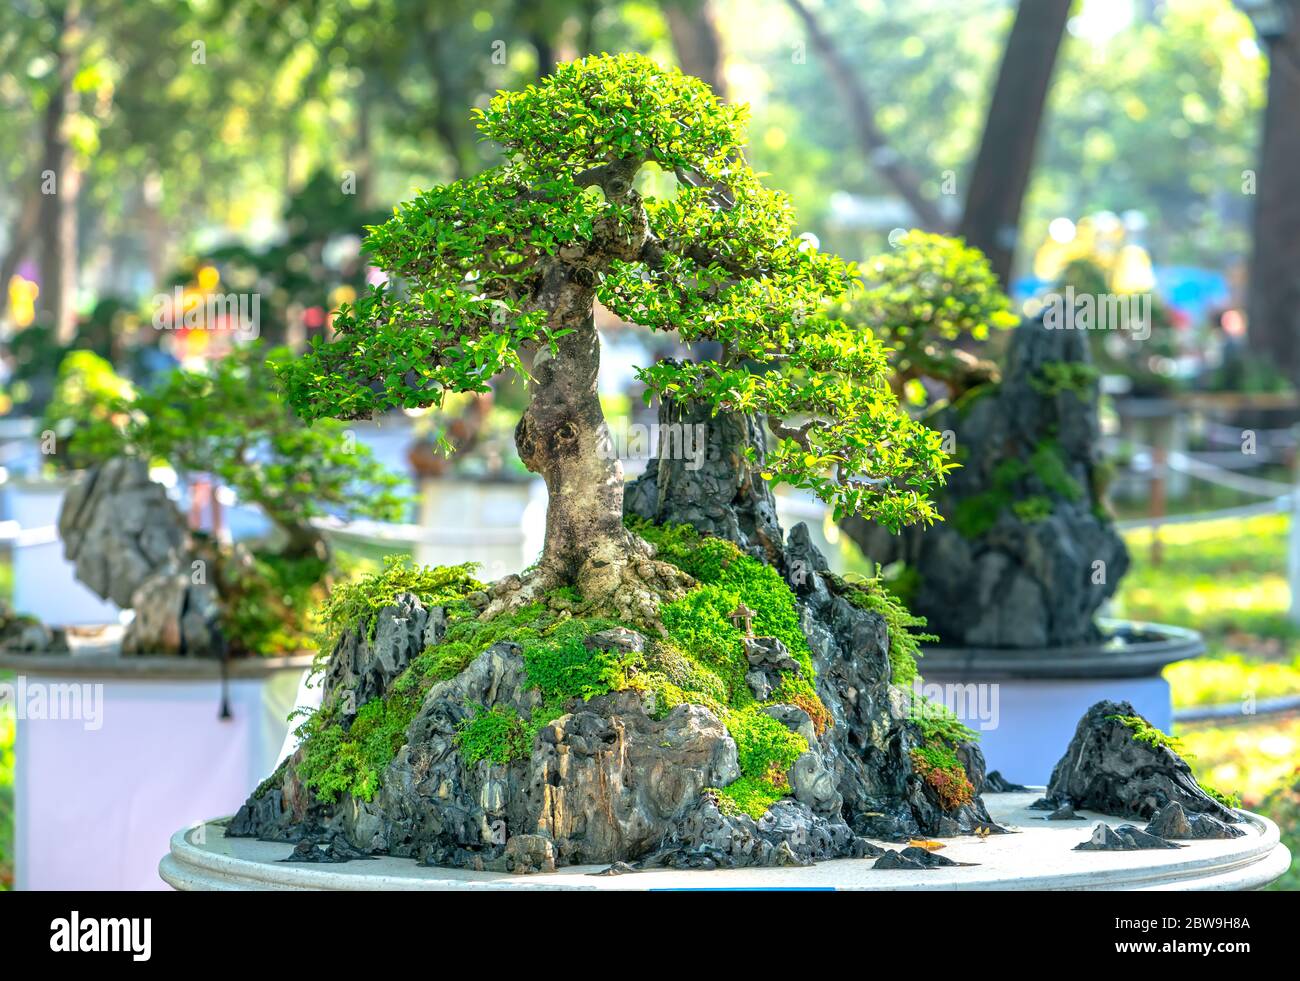 Bonsai And Penjing With Miniature In A Tray Like To Say In Human Life Must Be Strong Rise Patience Overcome All Challenges To Live Good And Useful To Stock Photo Alamy